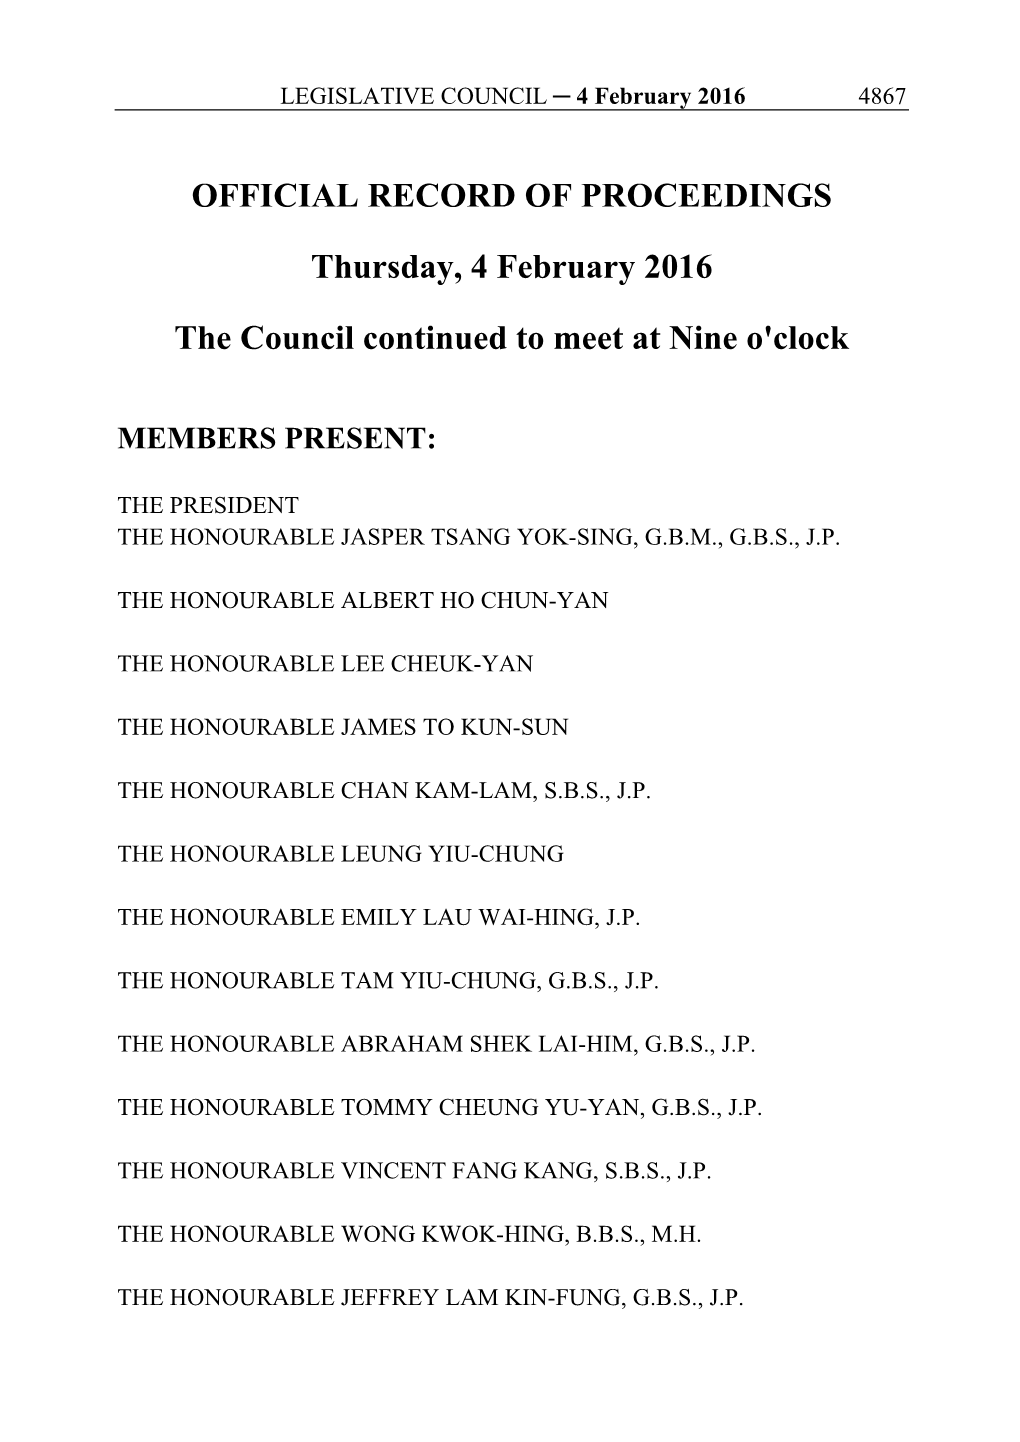 OFFICIAL RECORD of PROCEEDINGS Thursday, 4 February 2016 the Council Continued to Meet at Nine O'clock